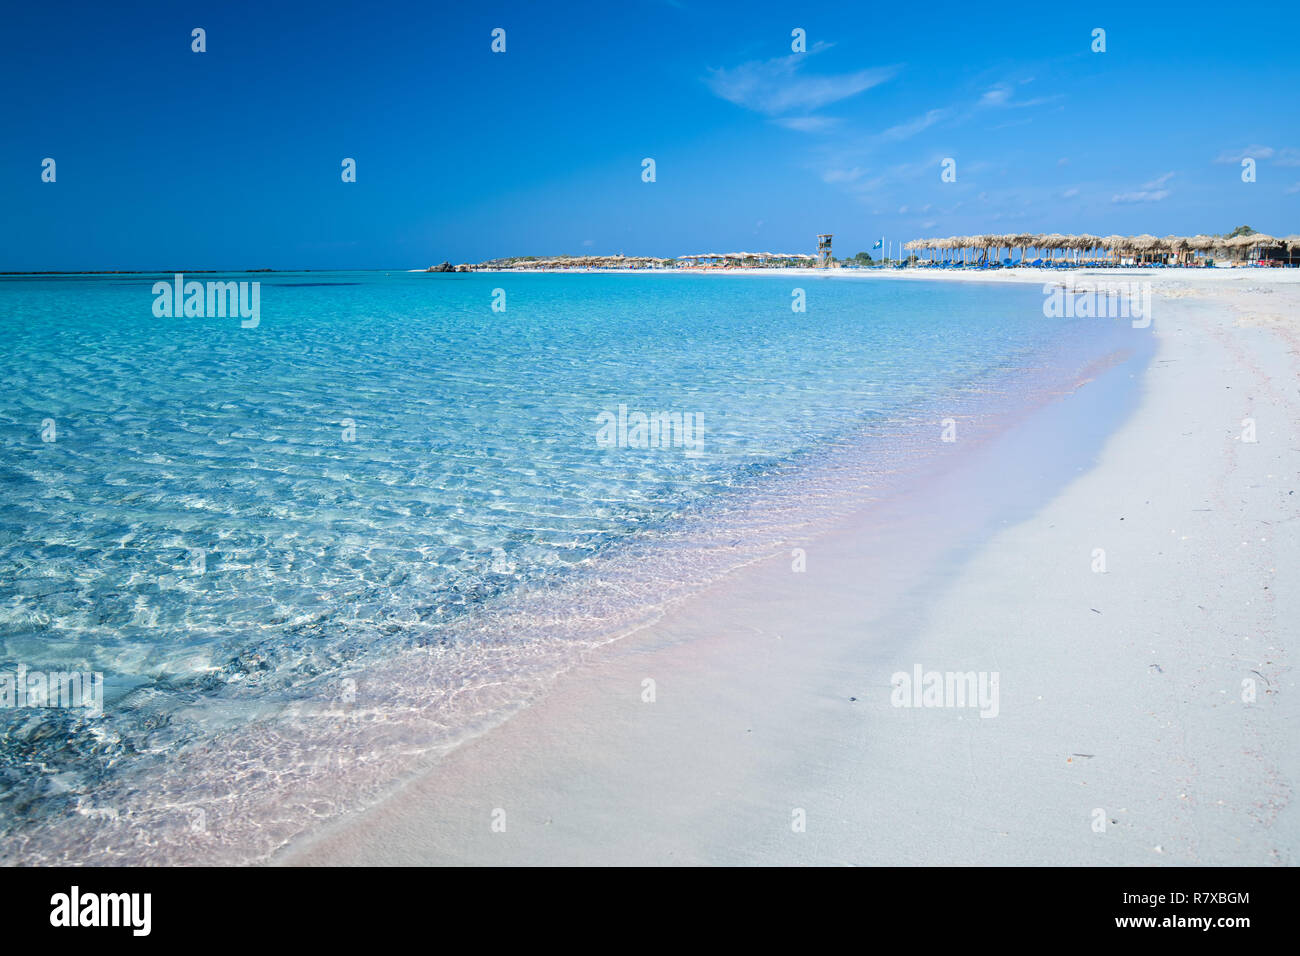 Elafonissi beach on Crete island with azure clear water, Greece, Europe. Crete is the largest and most populous of the Greek islands. Stock Photo